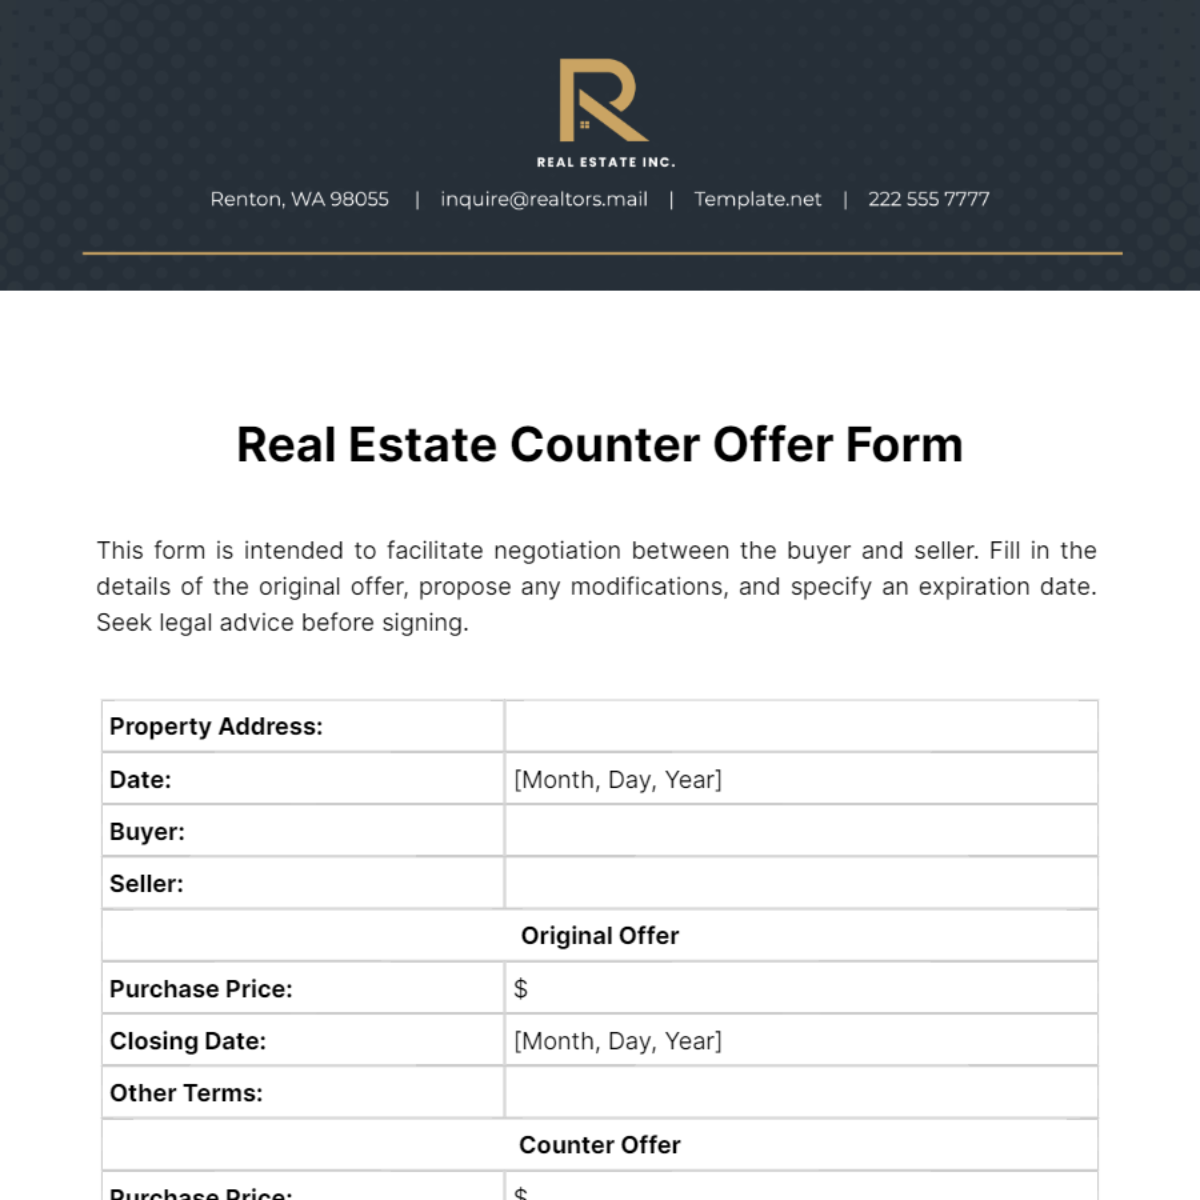 Real Estate Counter Offer Form Template